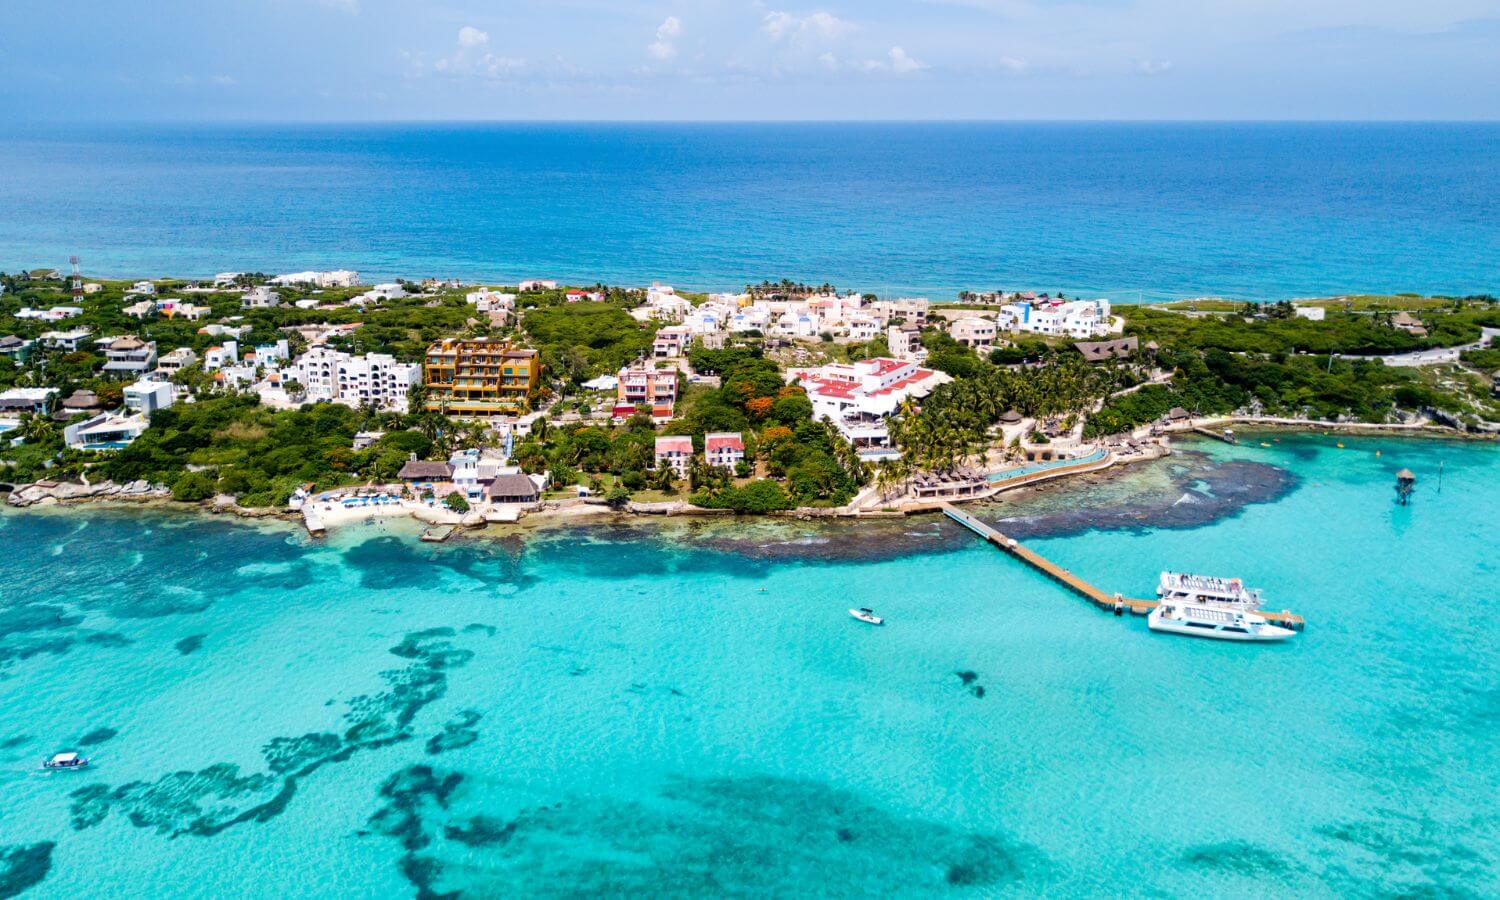 An areal view showing the beautiful clear waters Infront of Garrafon de Castillo, Isla Mujeres